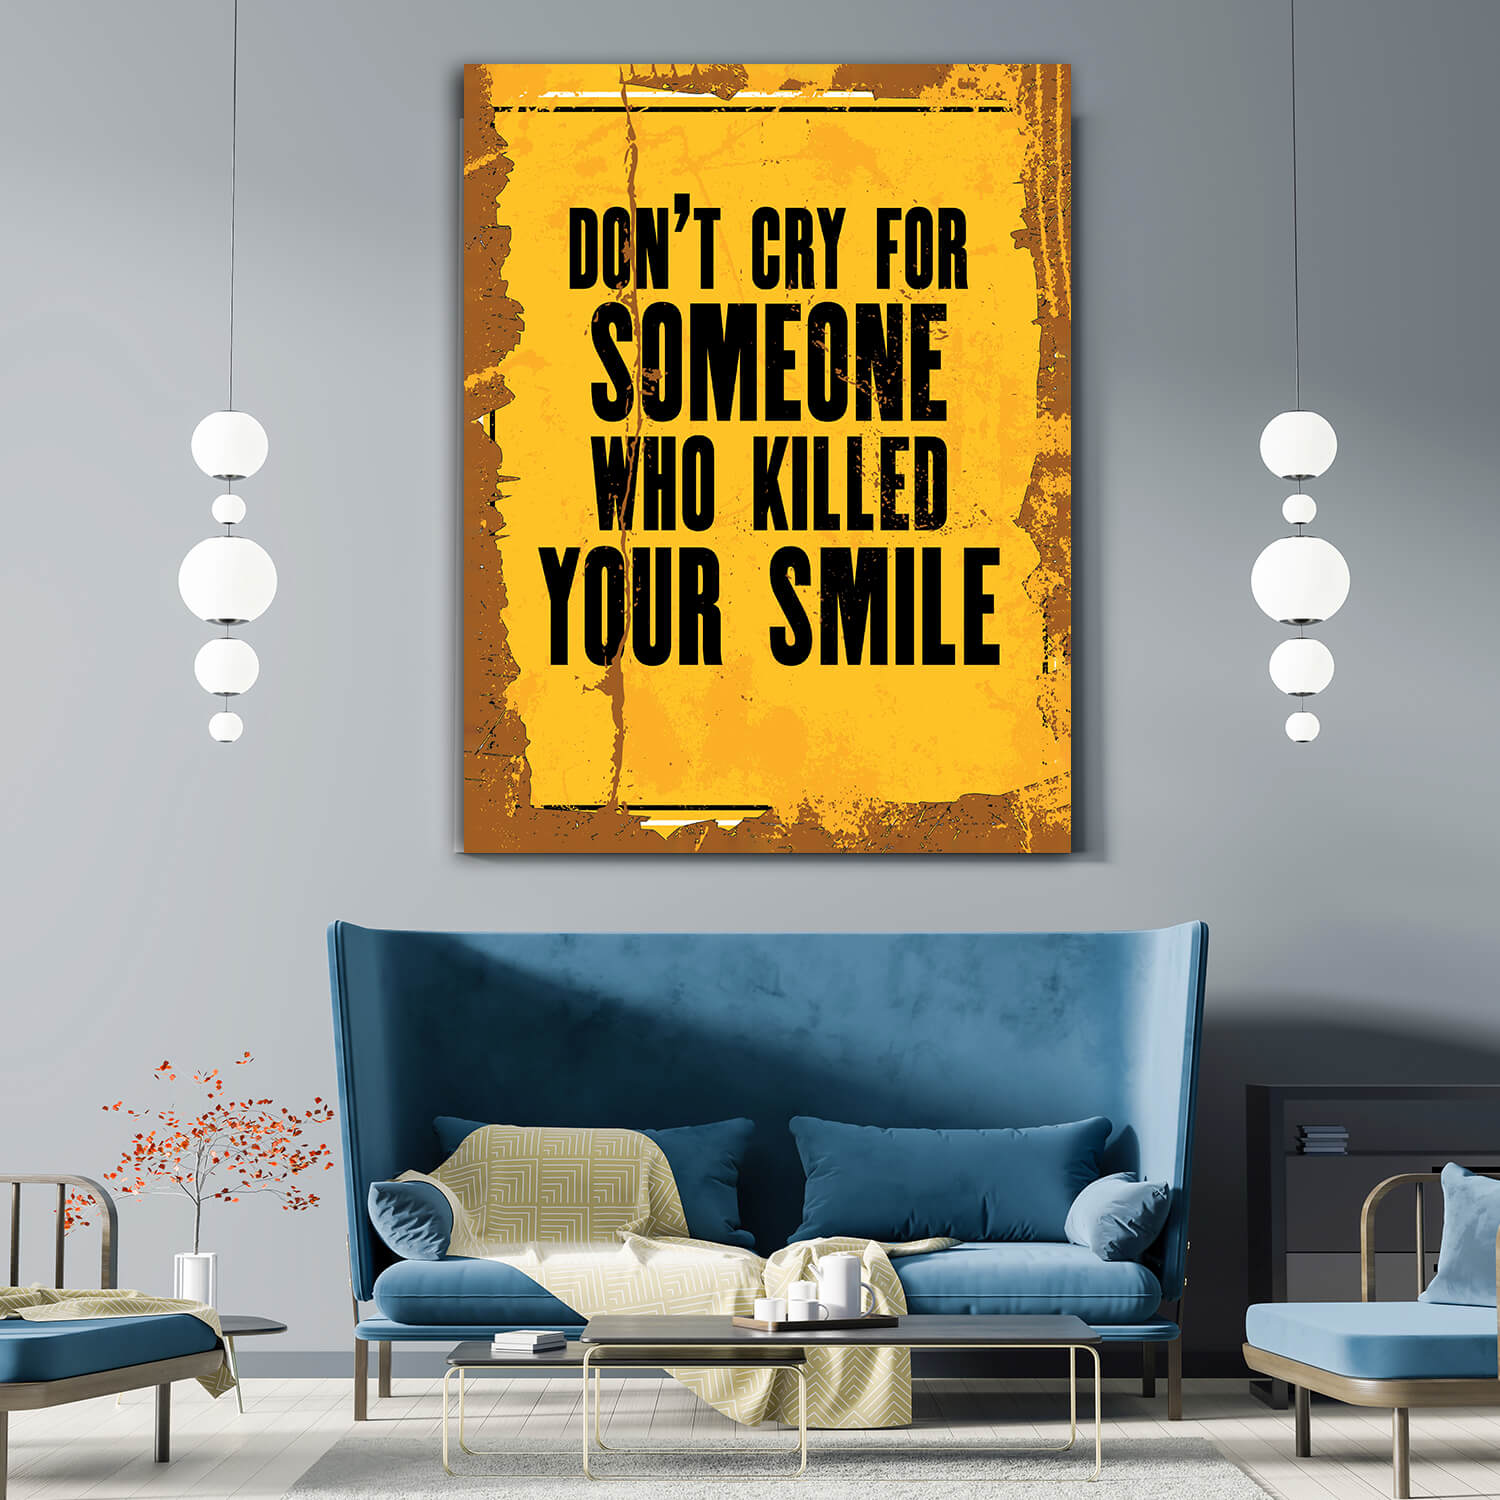 W1_0029_M&P_0005_ML_0024_32765796_motivation quote DO NOT CRY FOR SOMEONE WHO KILLED YOUR SMILE AOA10827